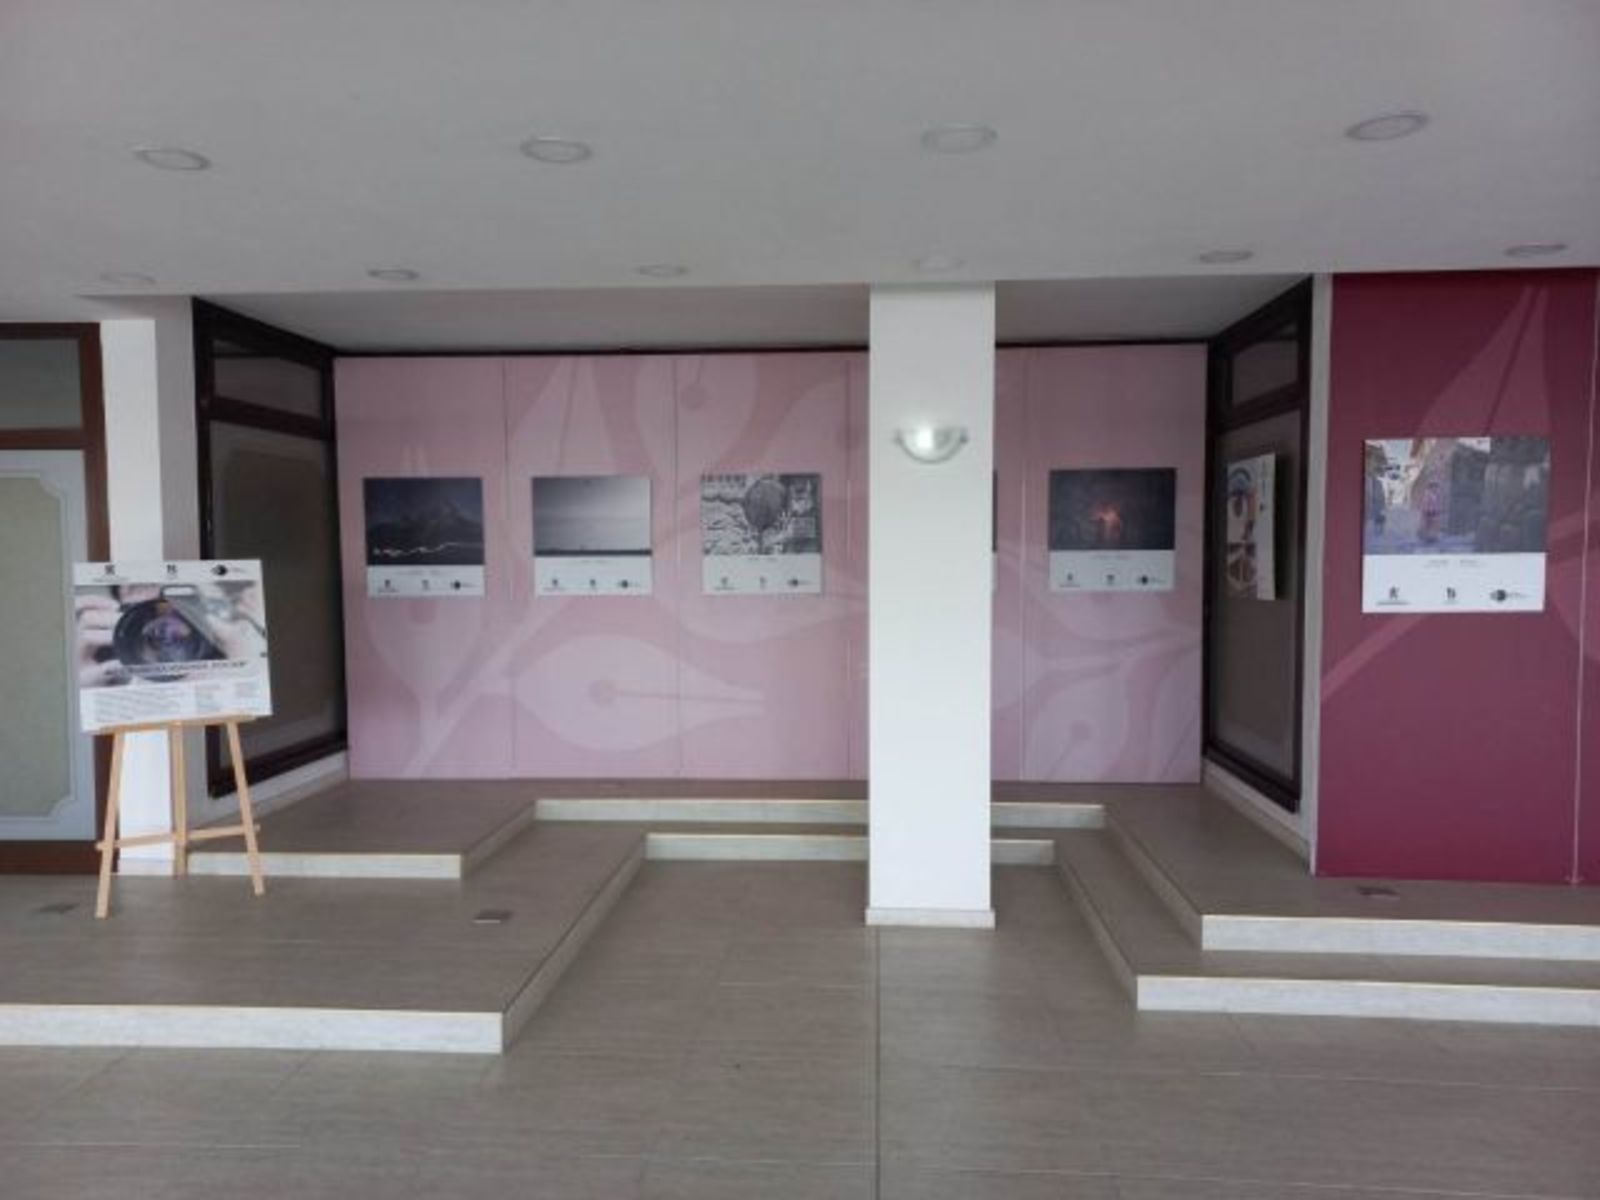 The Photographic Exhibition "Directions" can be Viewed until the End of March at the Ministry of Foreign Affairs